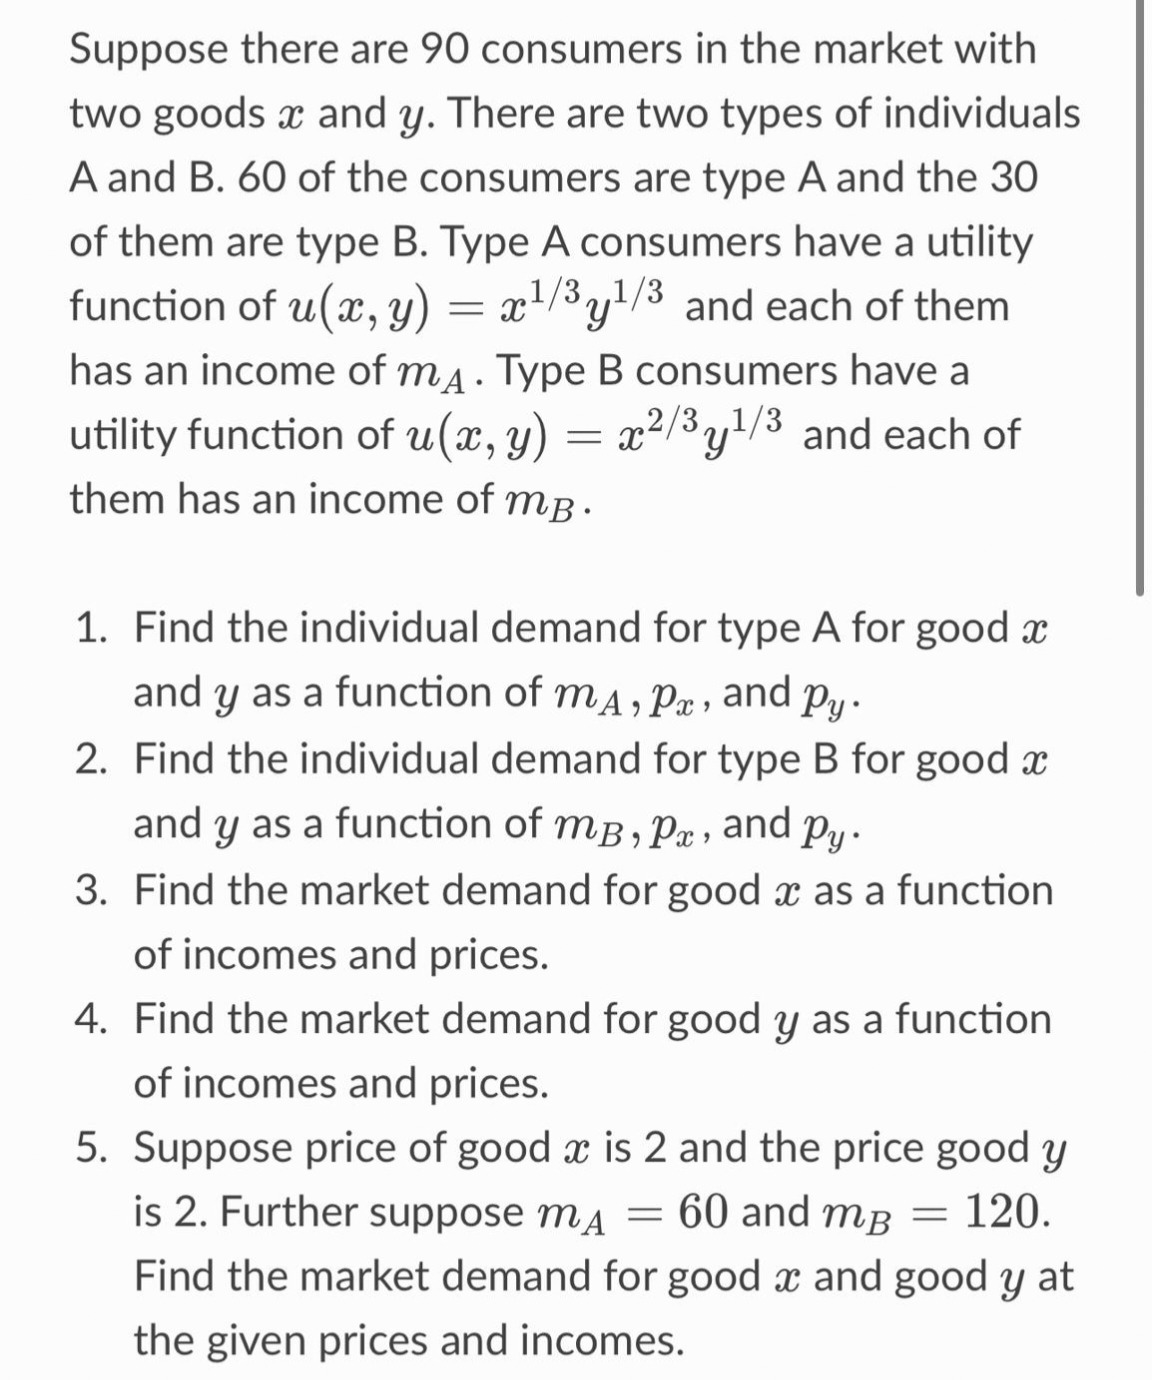 Suppose there are 90 consumers in the market with
two goods x and y. There are two types of individuals
A and B. 60 of the consumers are type A and the 30
of them are type B. Type A consumers have a utility
function of u(x, y) = x¹/³y¹/³ and each of them
has an income of mд. Type B consumers have a
utility function of u(x, y) = x²/³y¹/³ and each of
them has an income of mp.
1. Find the individual demand for type A for good x
and y as a function of mA, P, and py.
2. Find the individual demand for type B for good x
and y as a function of m³, px, and py.
3. Find the market demand for good as a function
of incomes and prices.
4. Find the market demand for good y as a function
of incomes and prices.
-
5. Suppose price of good x is 2 and the price good y
is 2. Further suppose mA = 60 and m³ = 120.
Find the market demand for good x and good y at
the given prices and incomes.